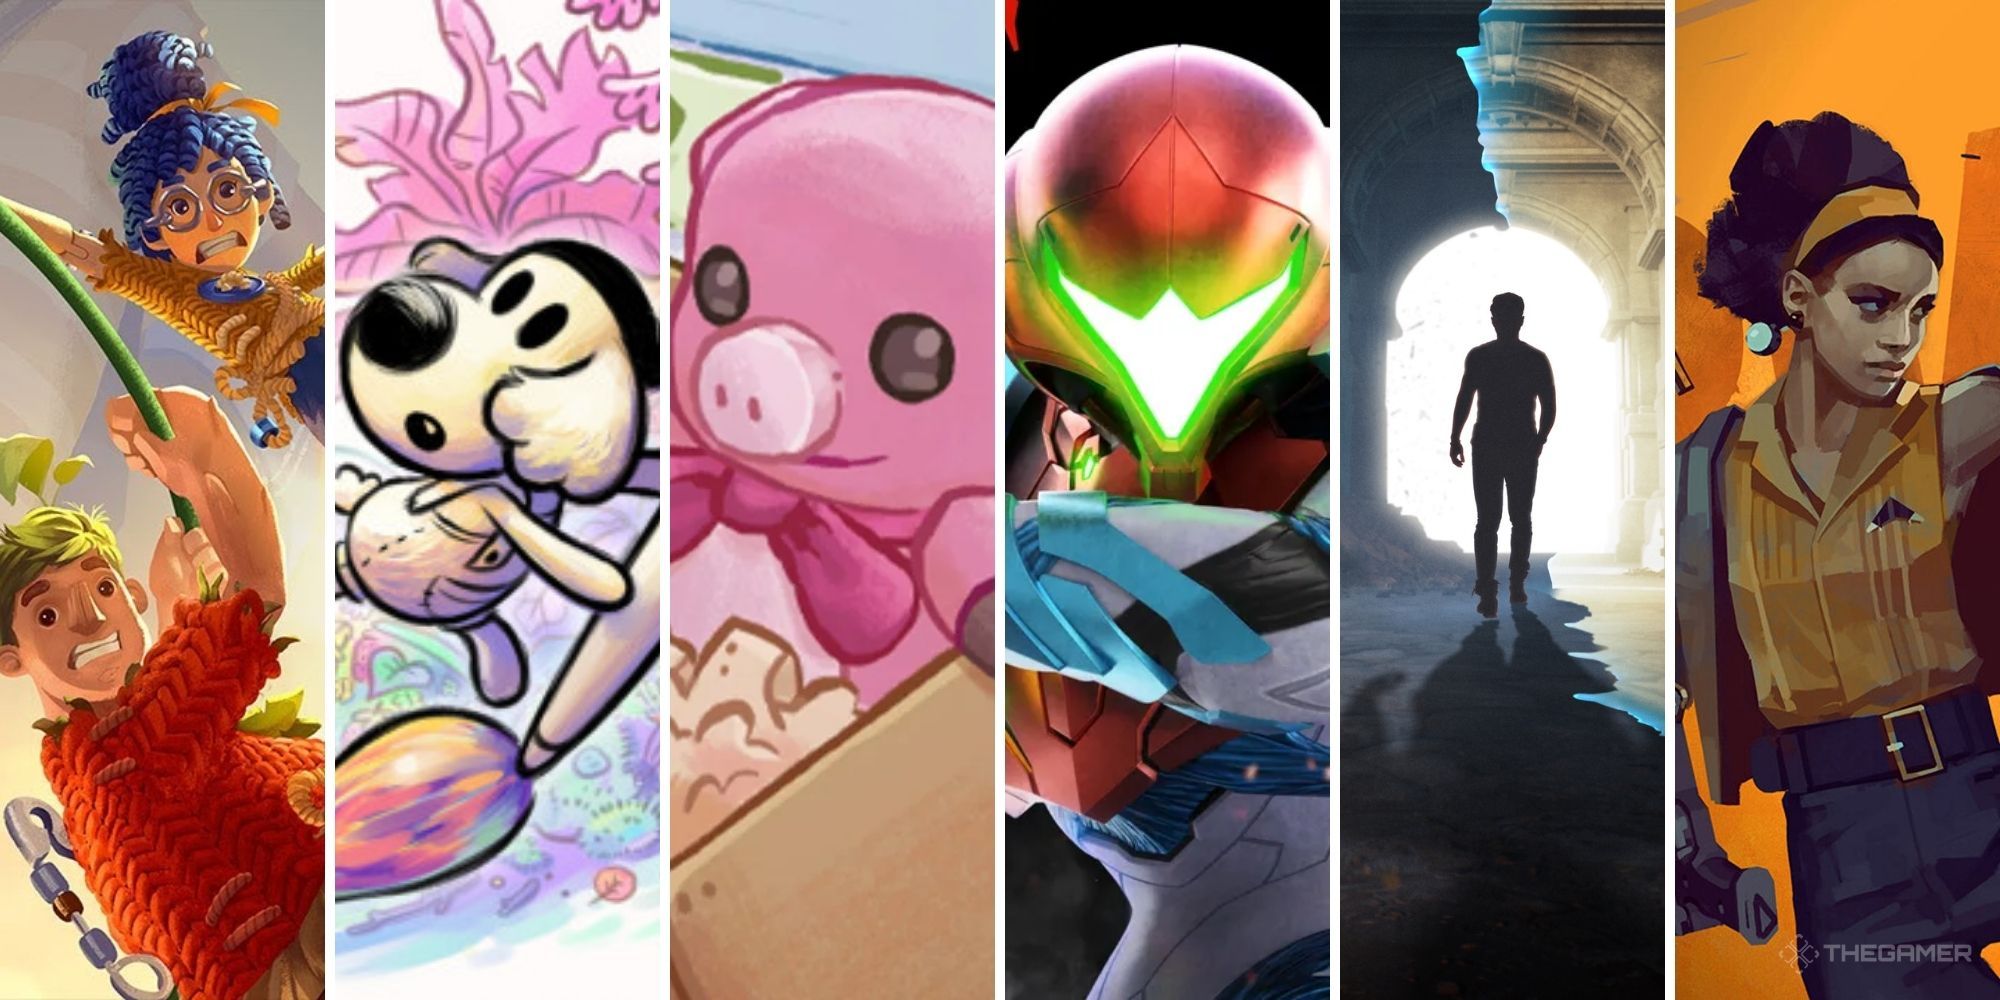 Here are all the Game of the Year awards you can vote for in 2022